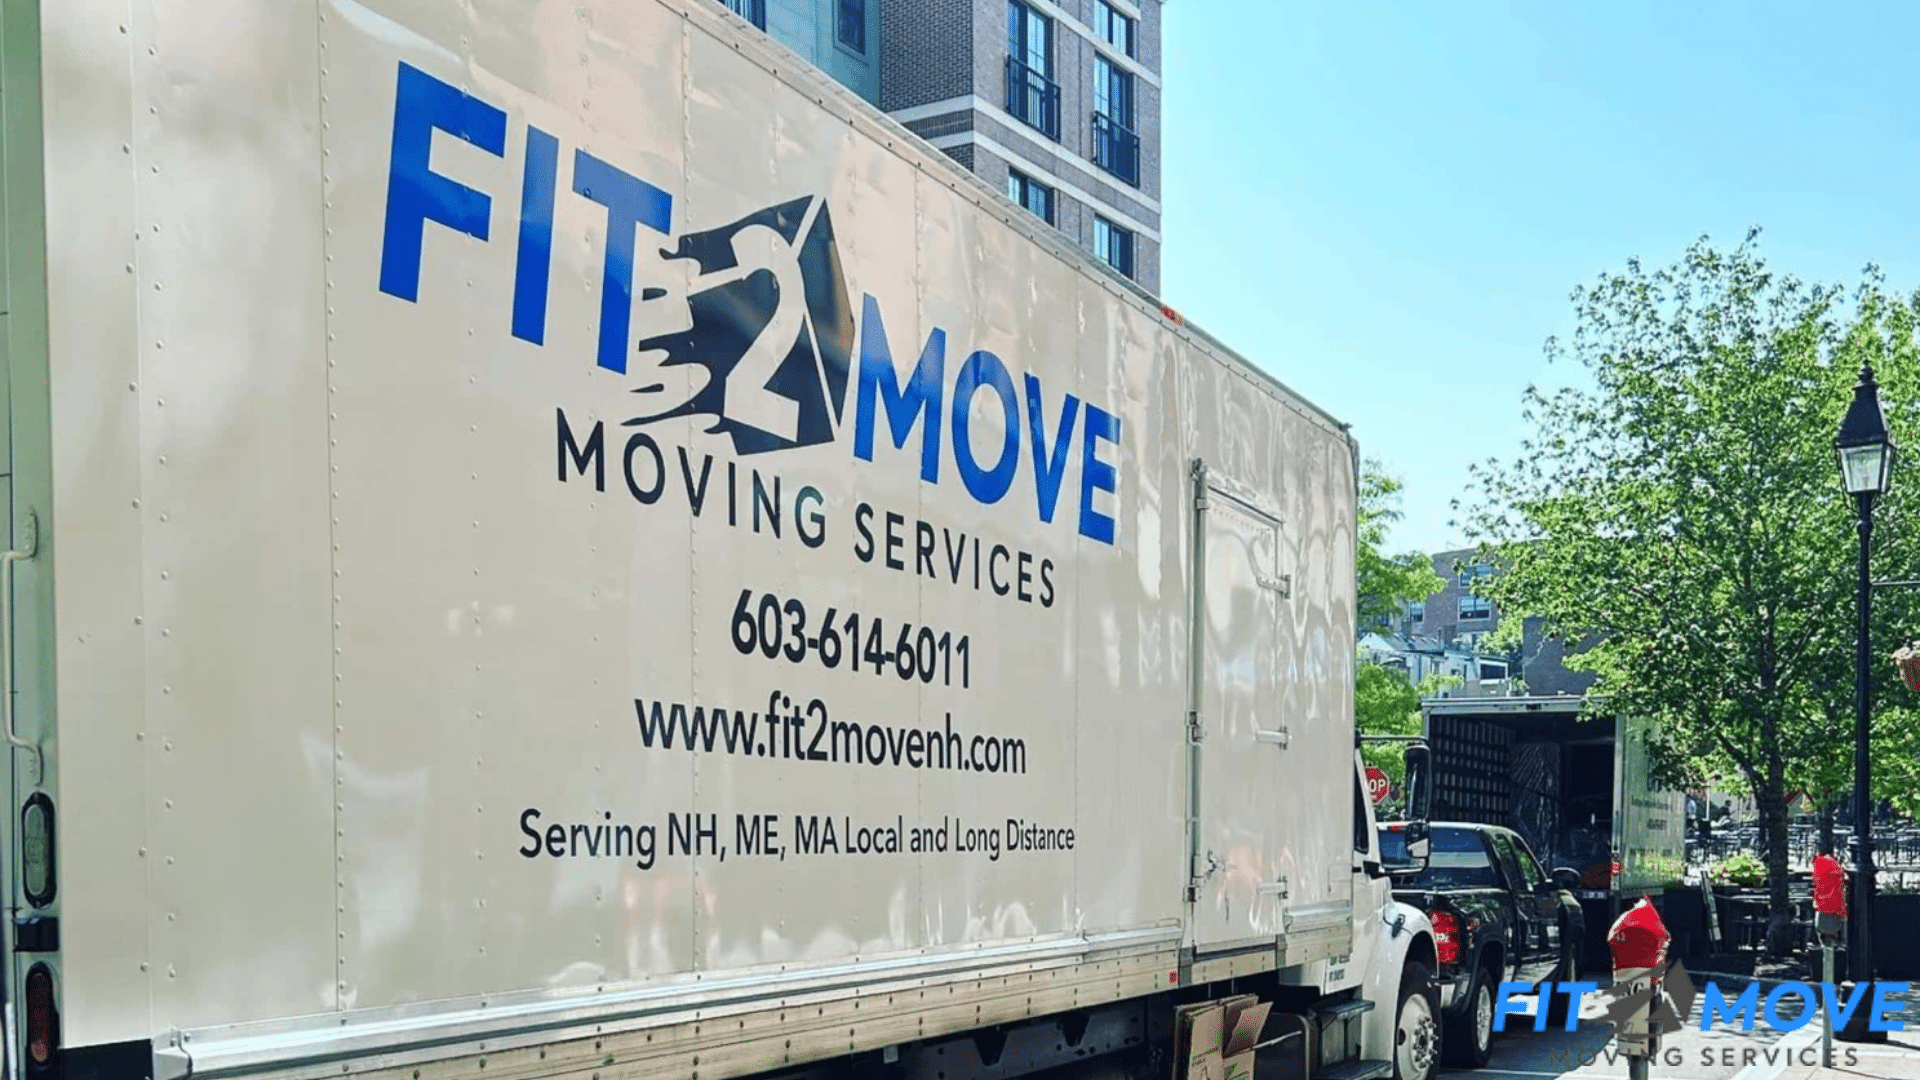 Internal Movers Companies in Rockingham County New Hampshire